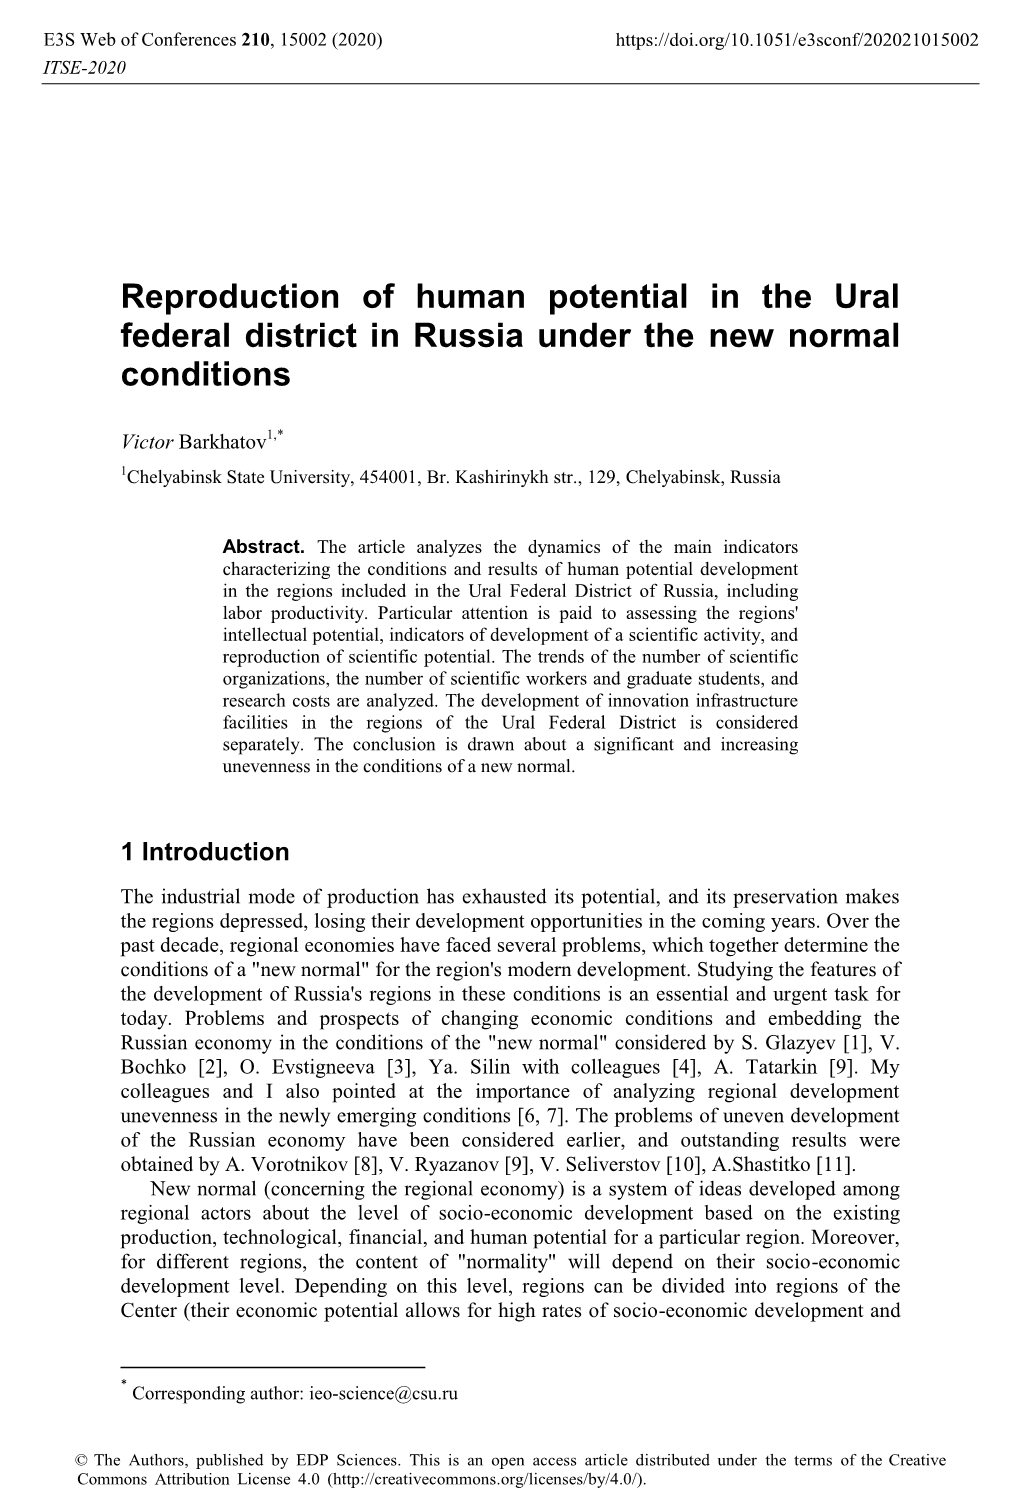 Reproduction of Human Potential in the Ural Federal District in Russia Under the New Normal Conditions